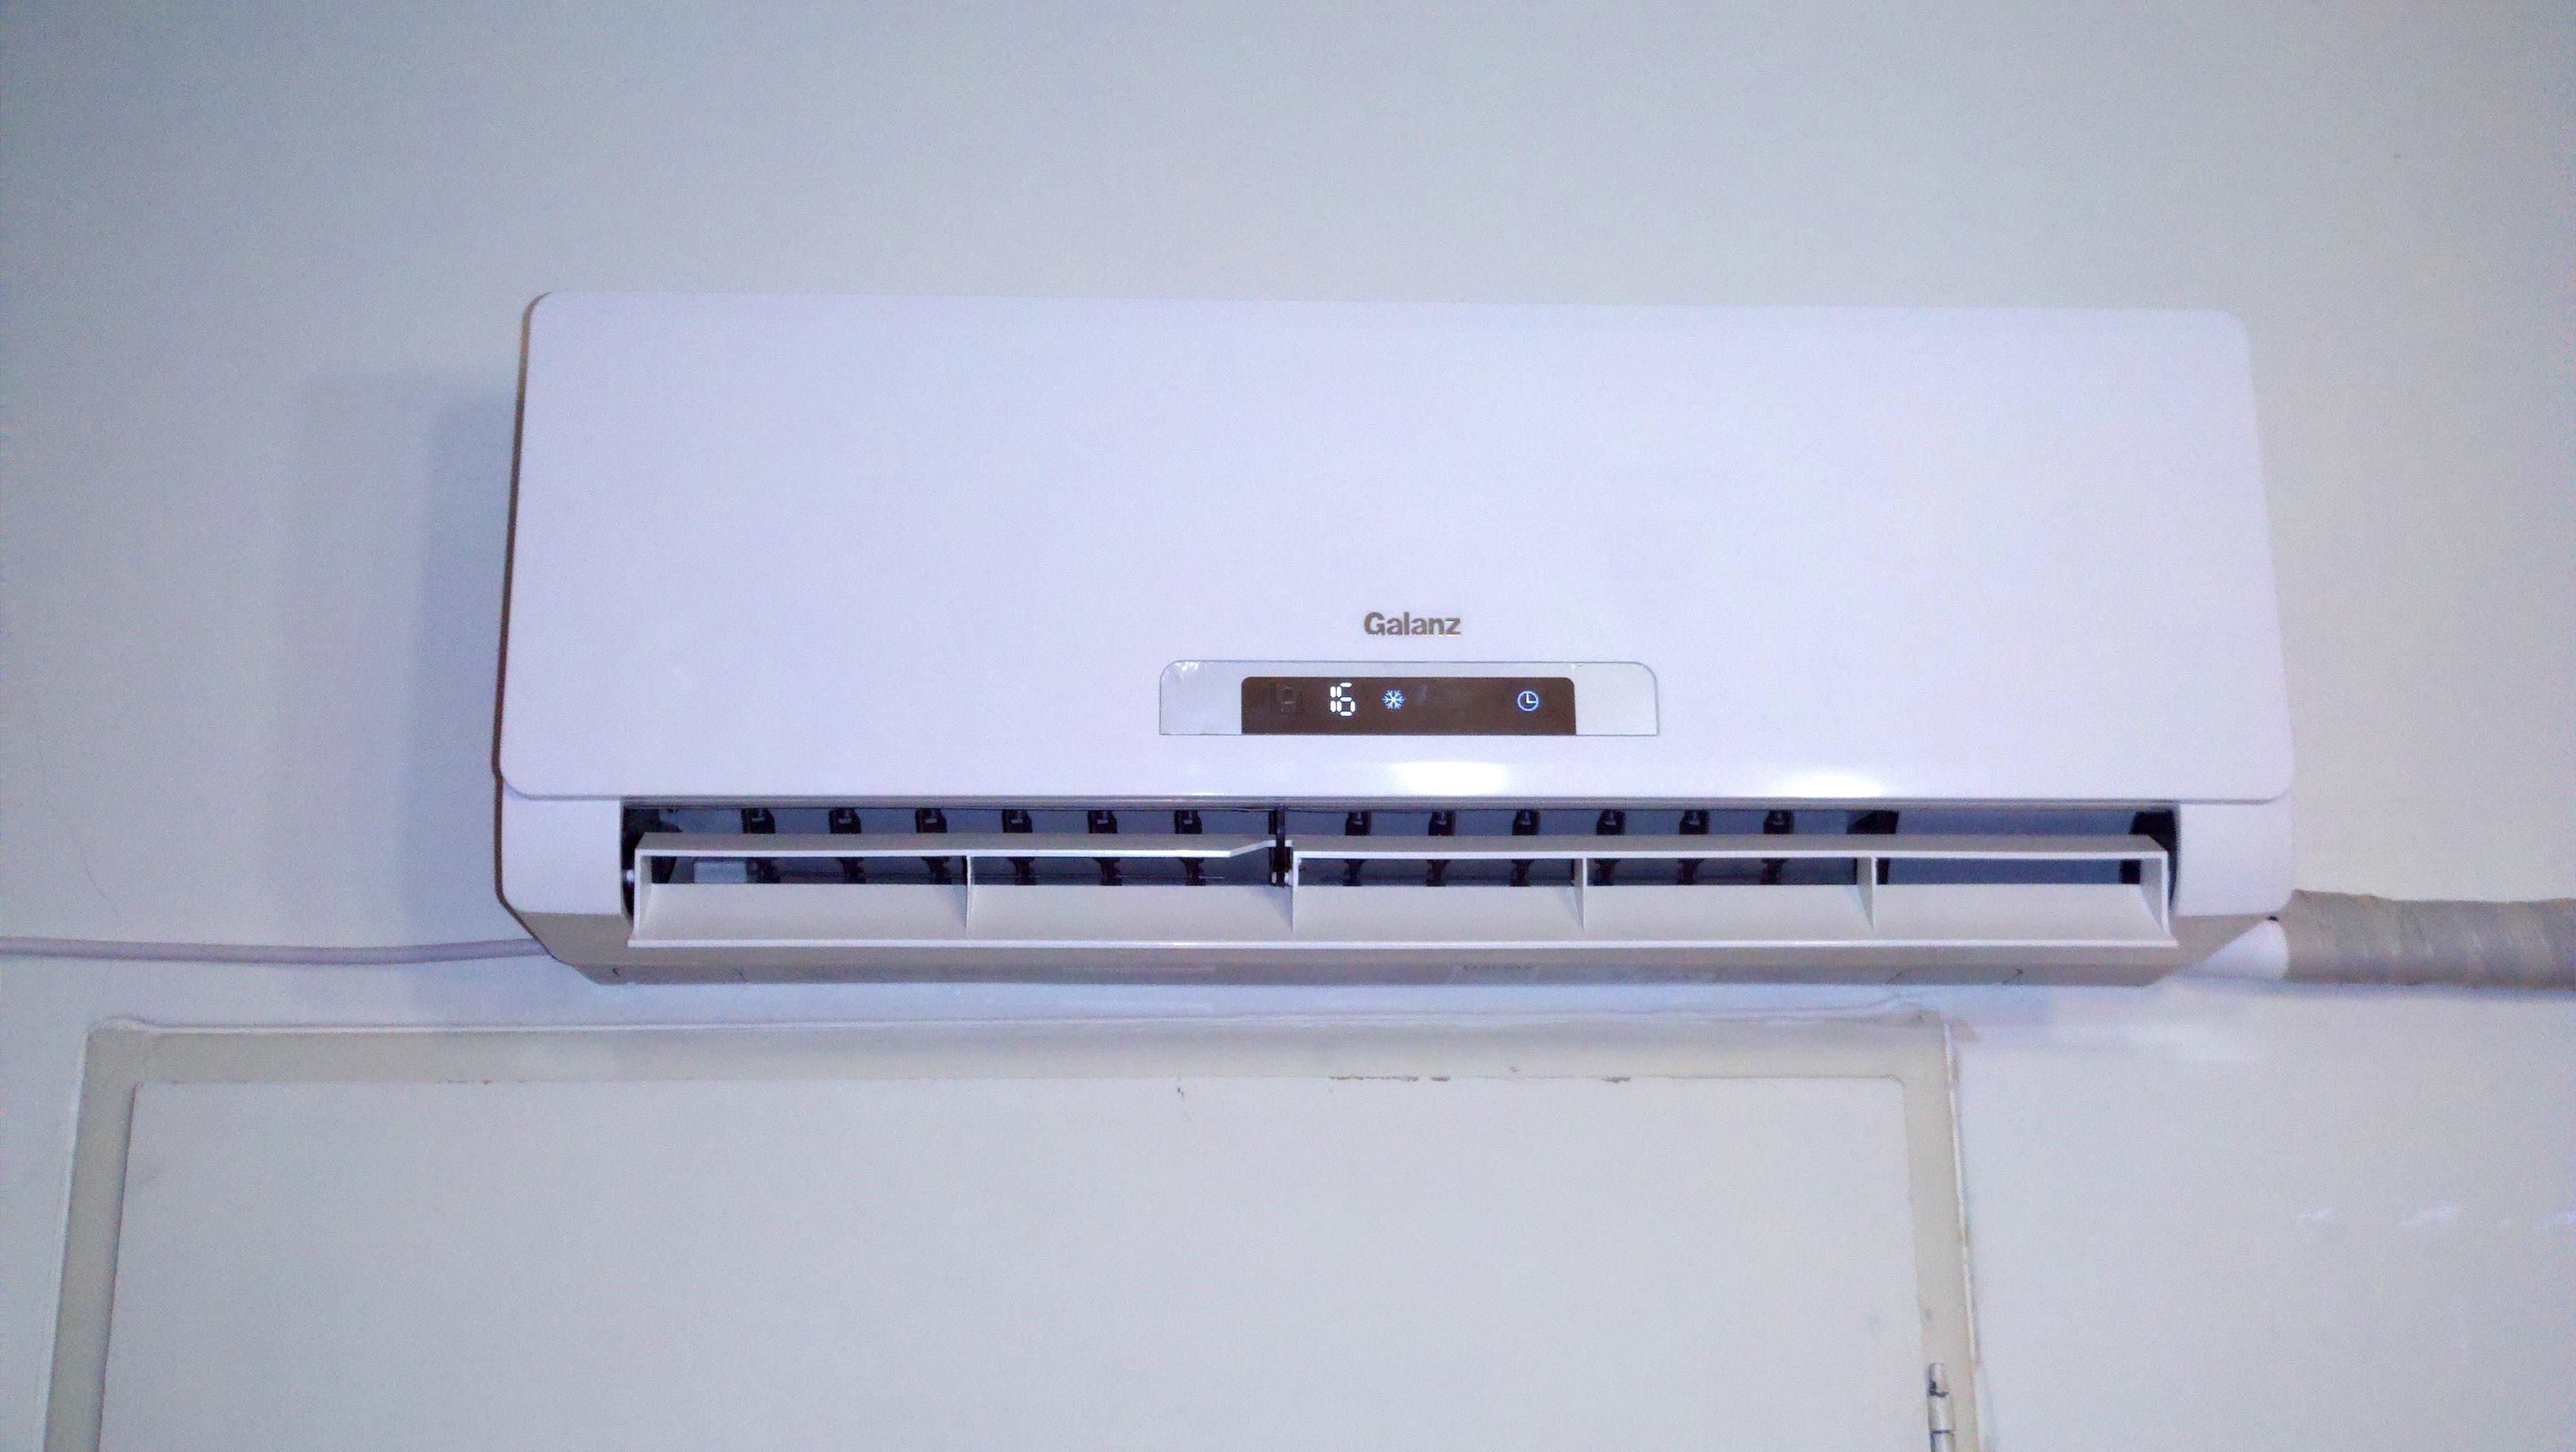 File:Galanz Air Conditioner 2.jpg - Wikimedia Commons